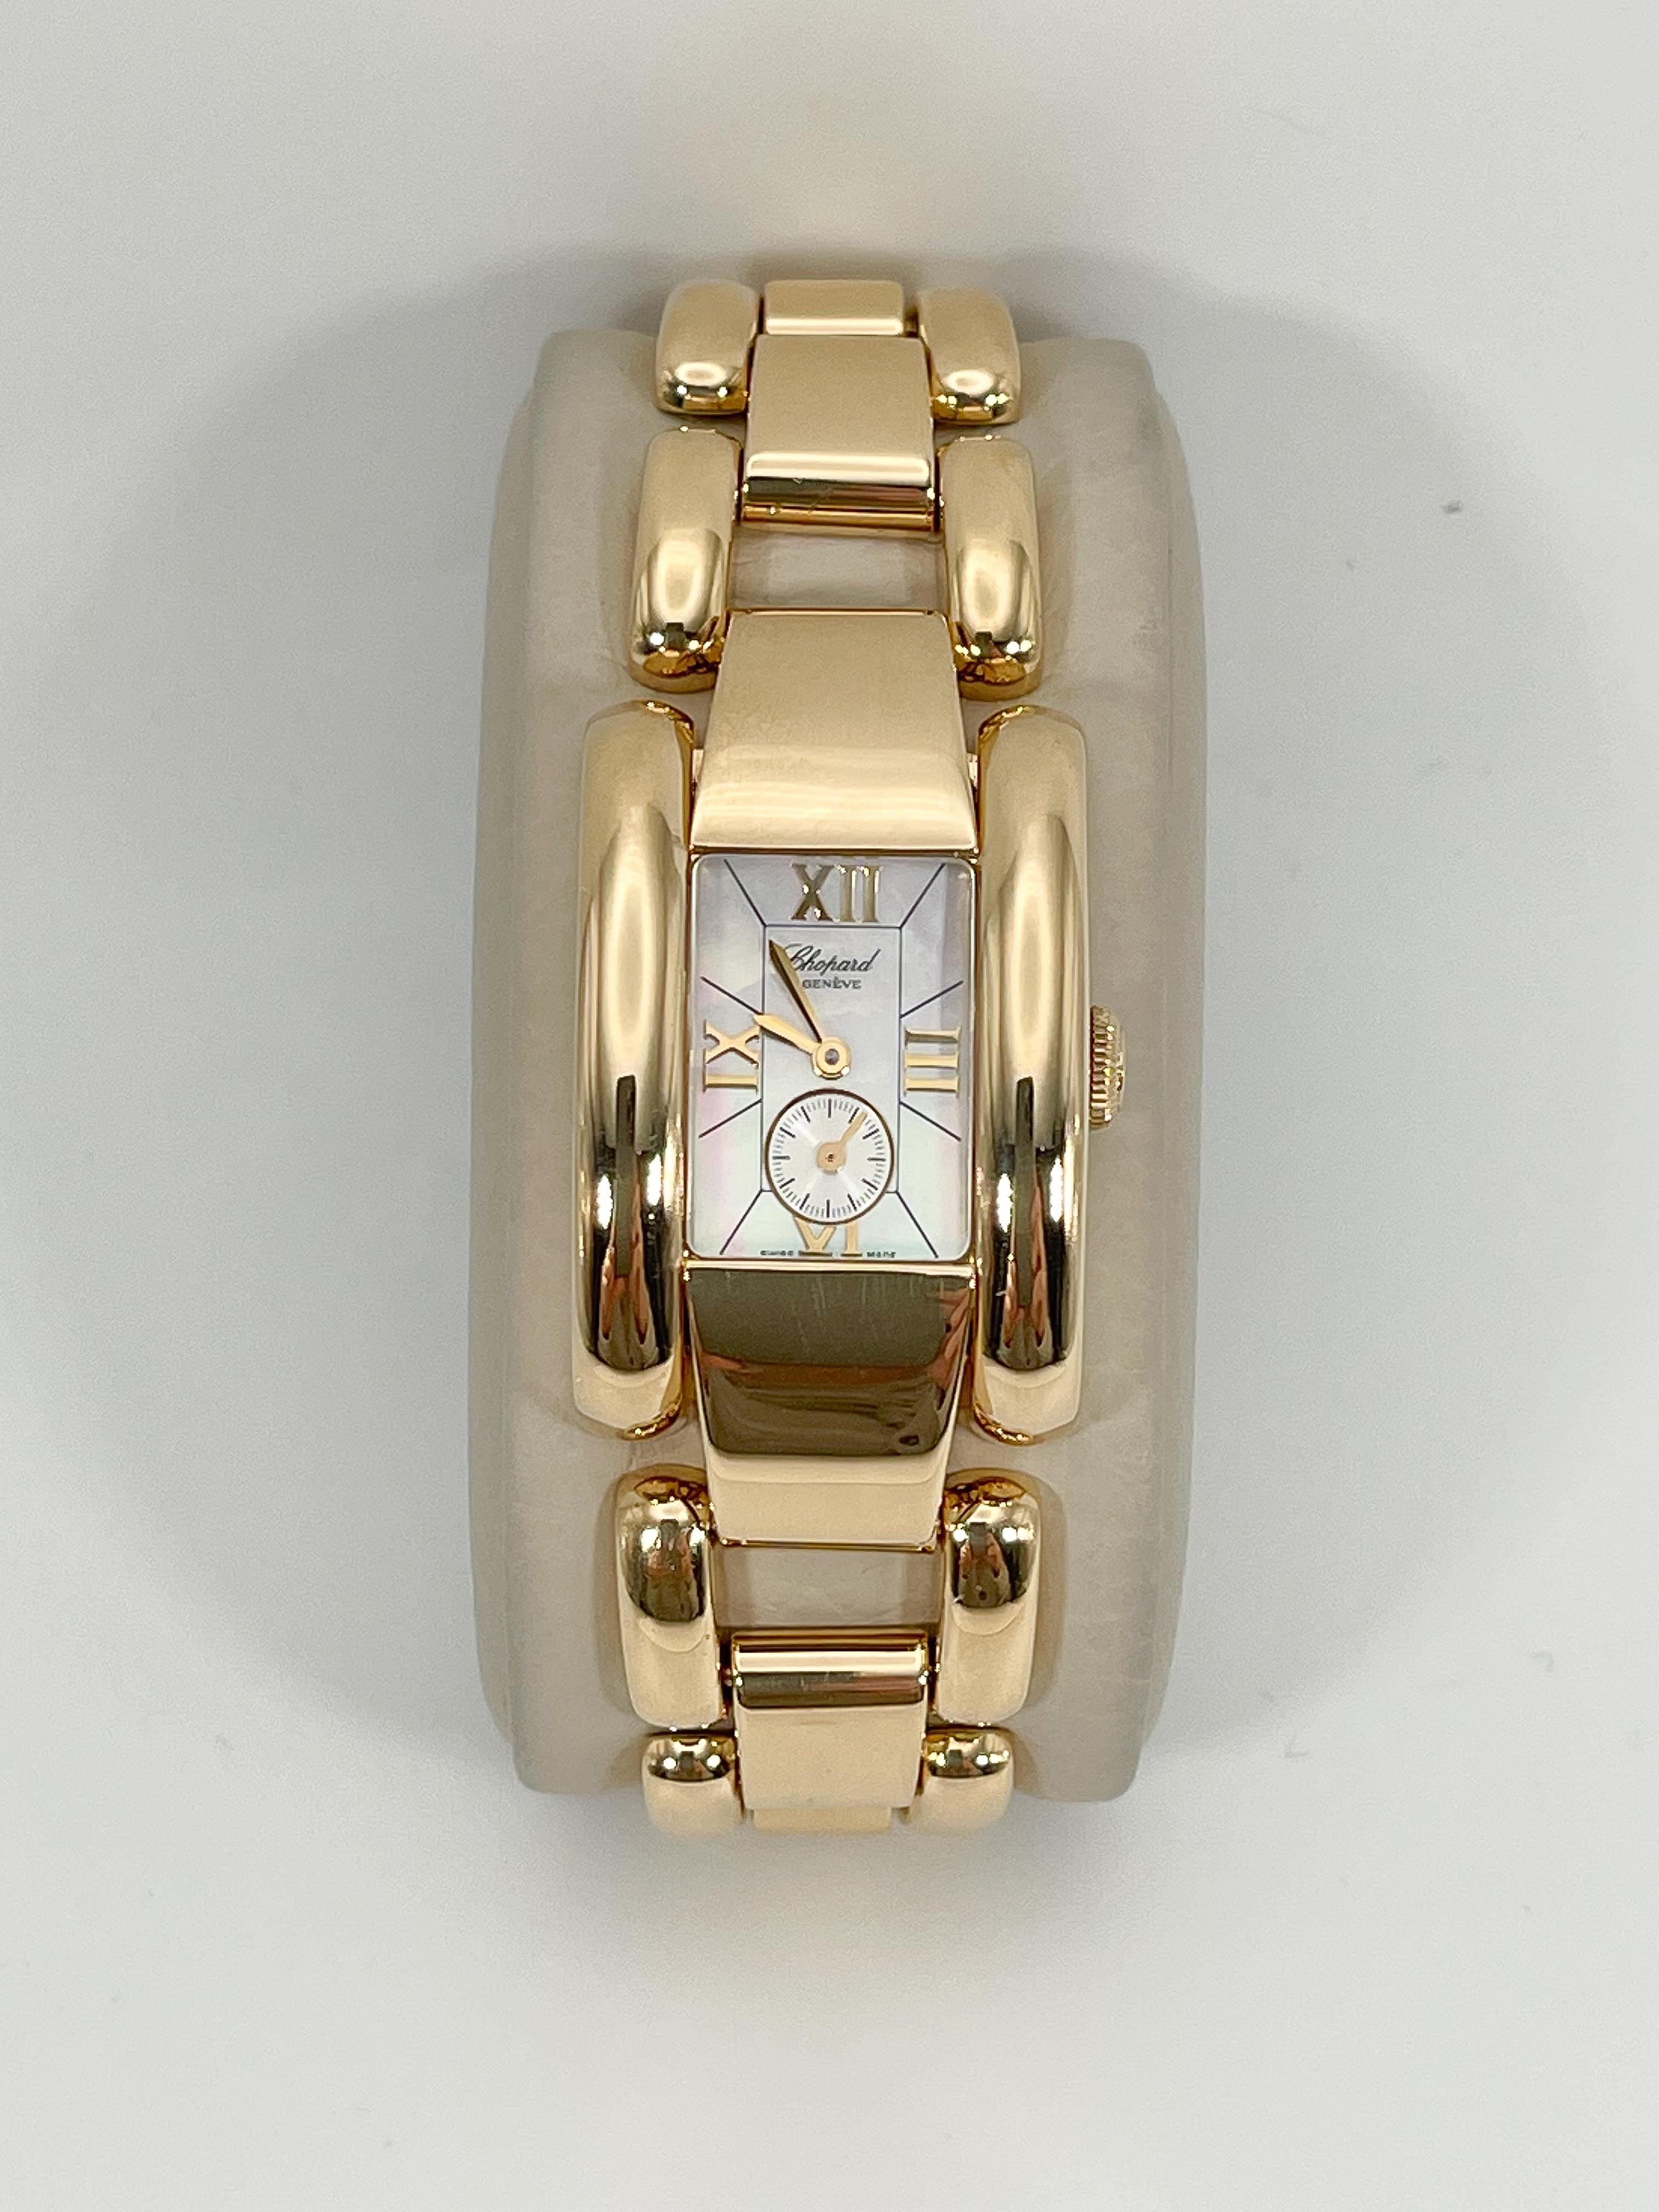 Chopard La Strada with rare mother of pearl dial. 
Ref. 41/6804
Watch is 18k yellow gold, production 2010, quartz movement, sapphire crystal, case diameter is 23mm x 34mm, roman numerals, has a total weight of 123 grams, and fits a size 6 1/2